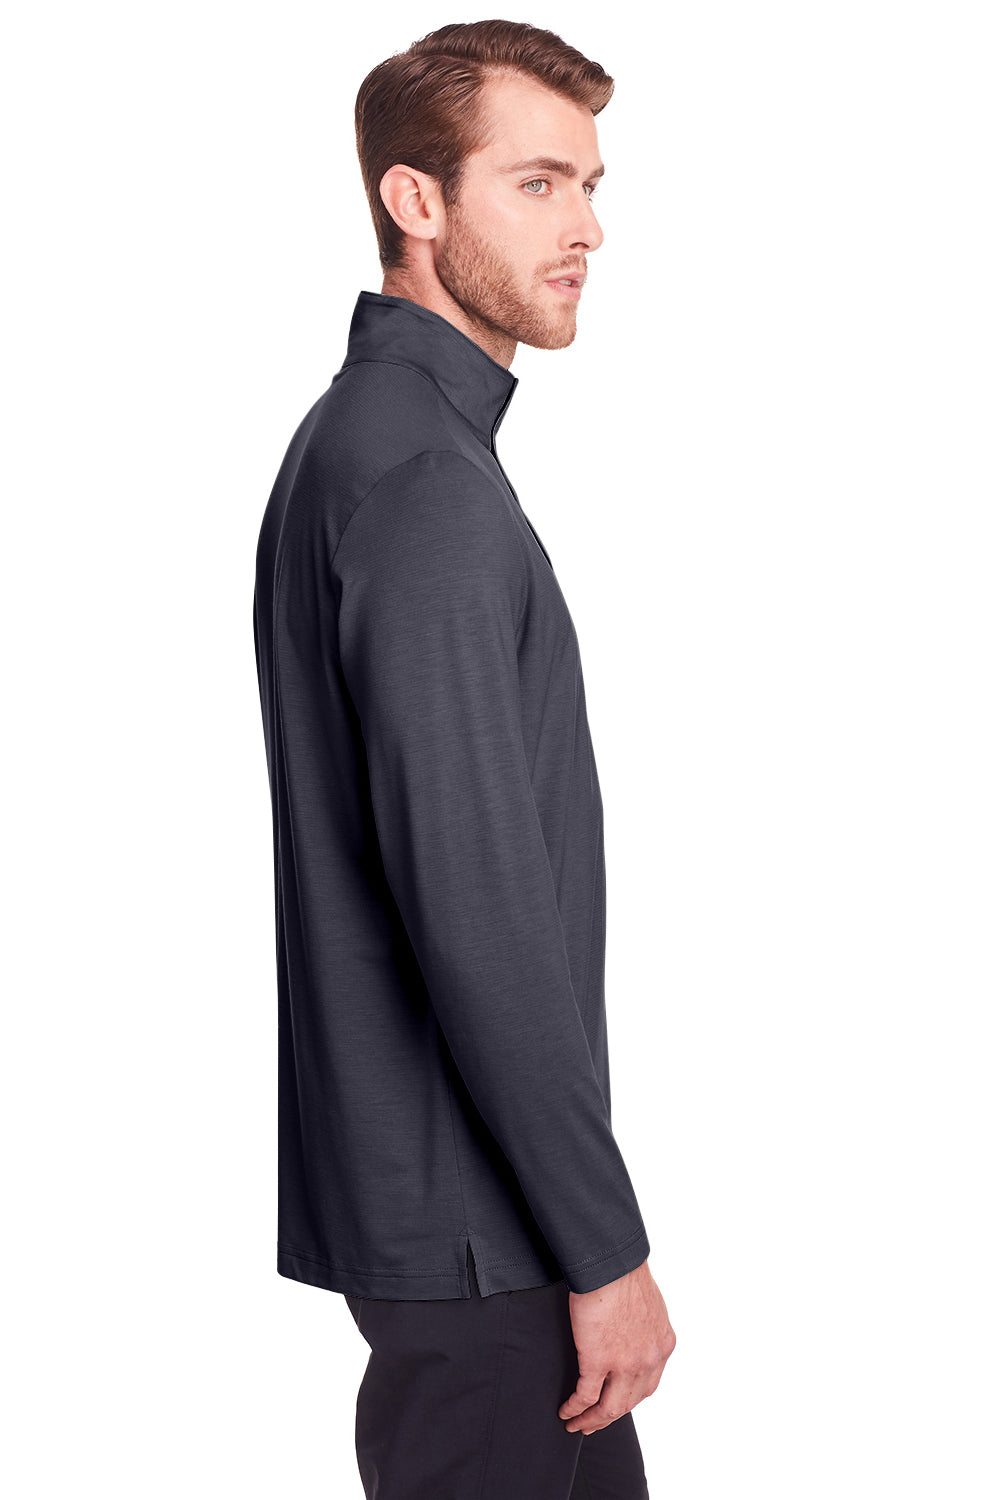 North End NE400 Mens Jaq Performance Moisture Wicking Long Sleeve Polo Shirt Carbon Grey Side